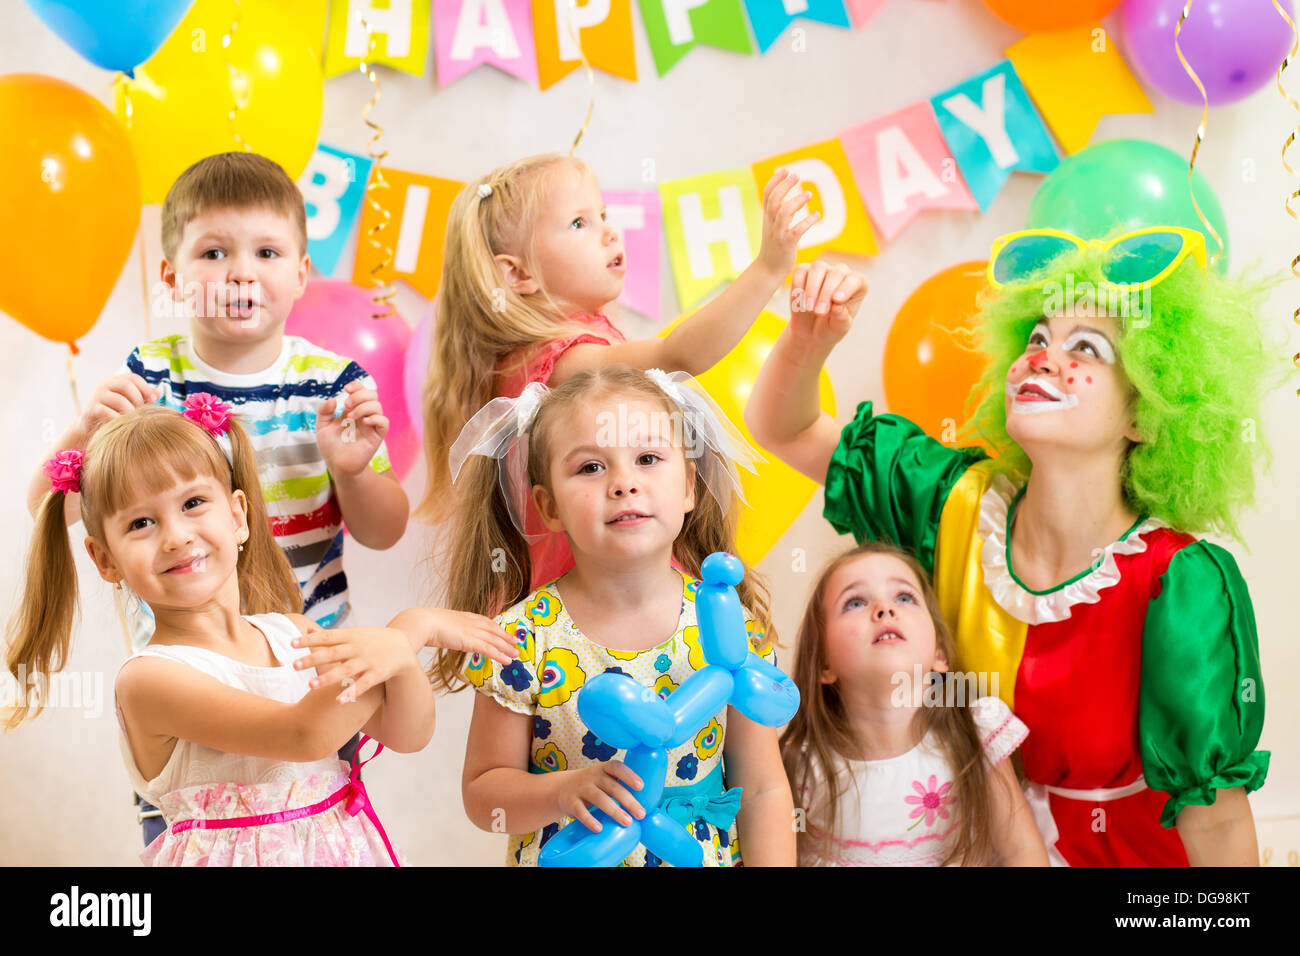 jolly kids group with clown celebrating birthday party Stock Photo